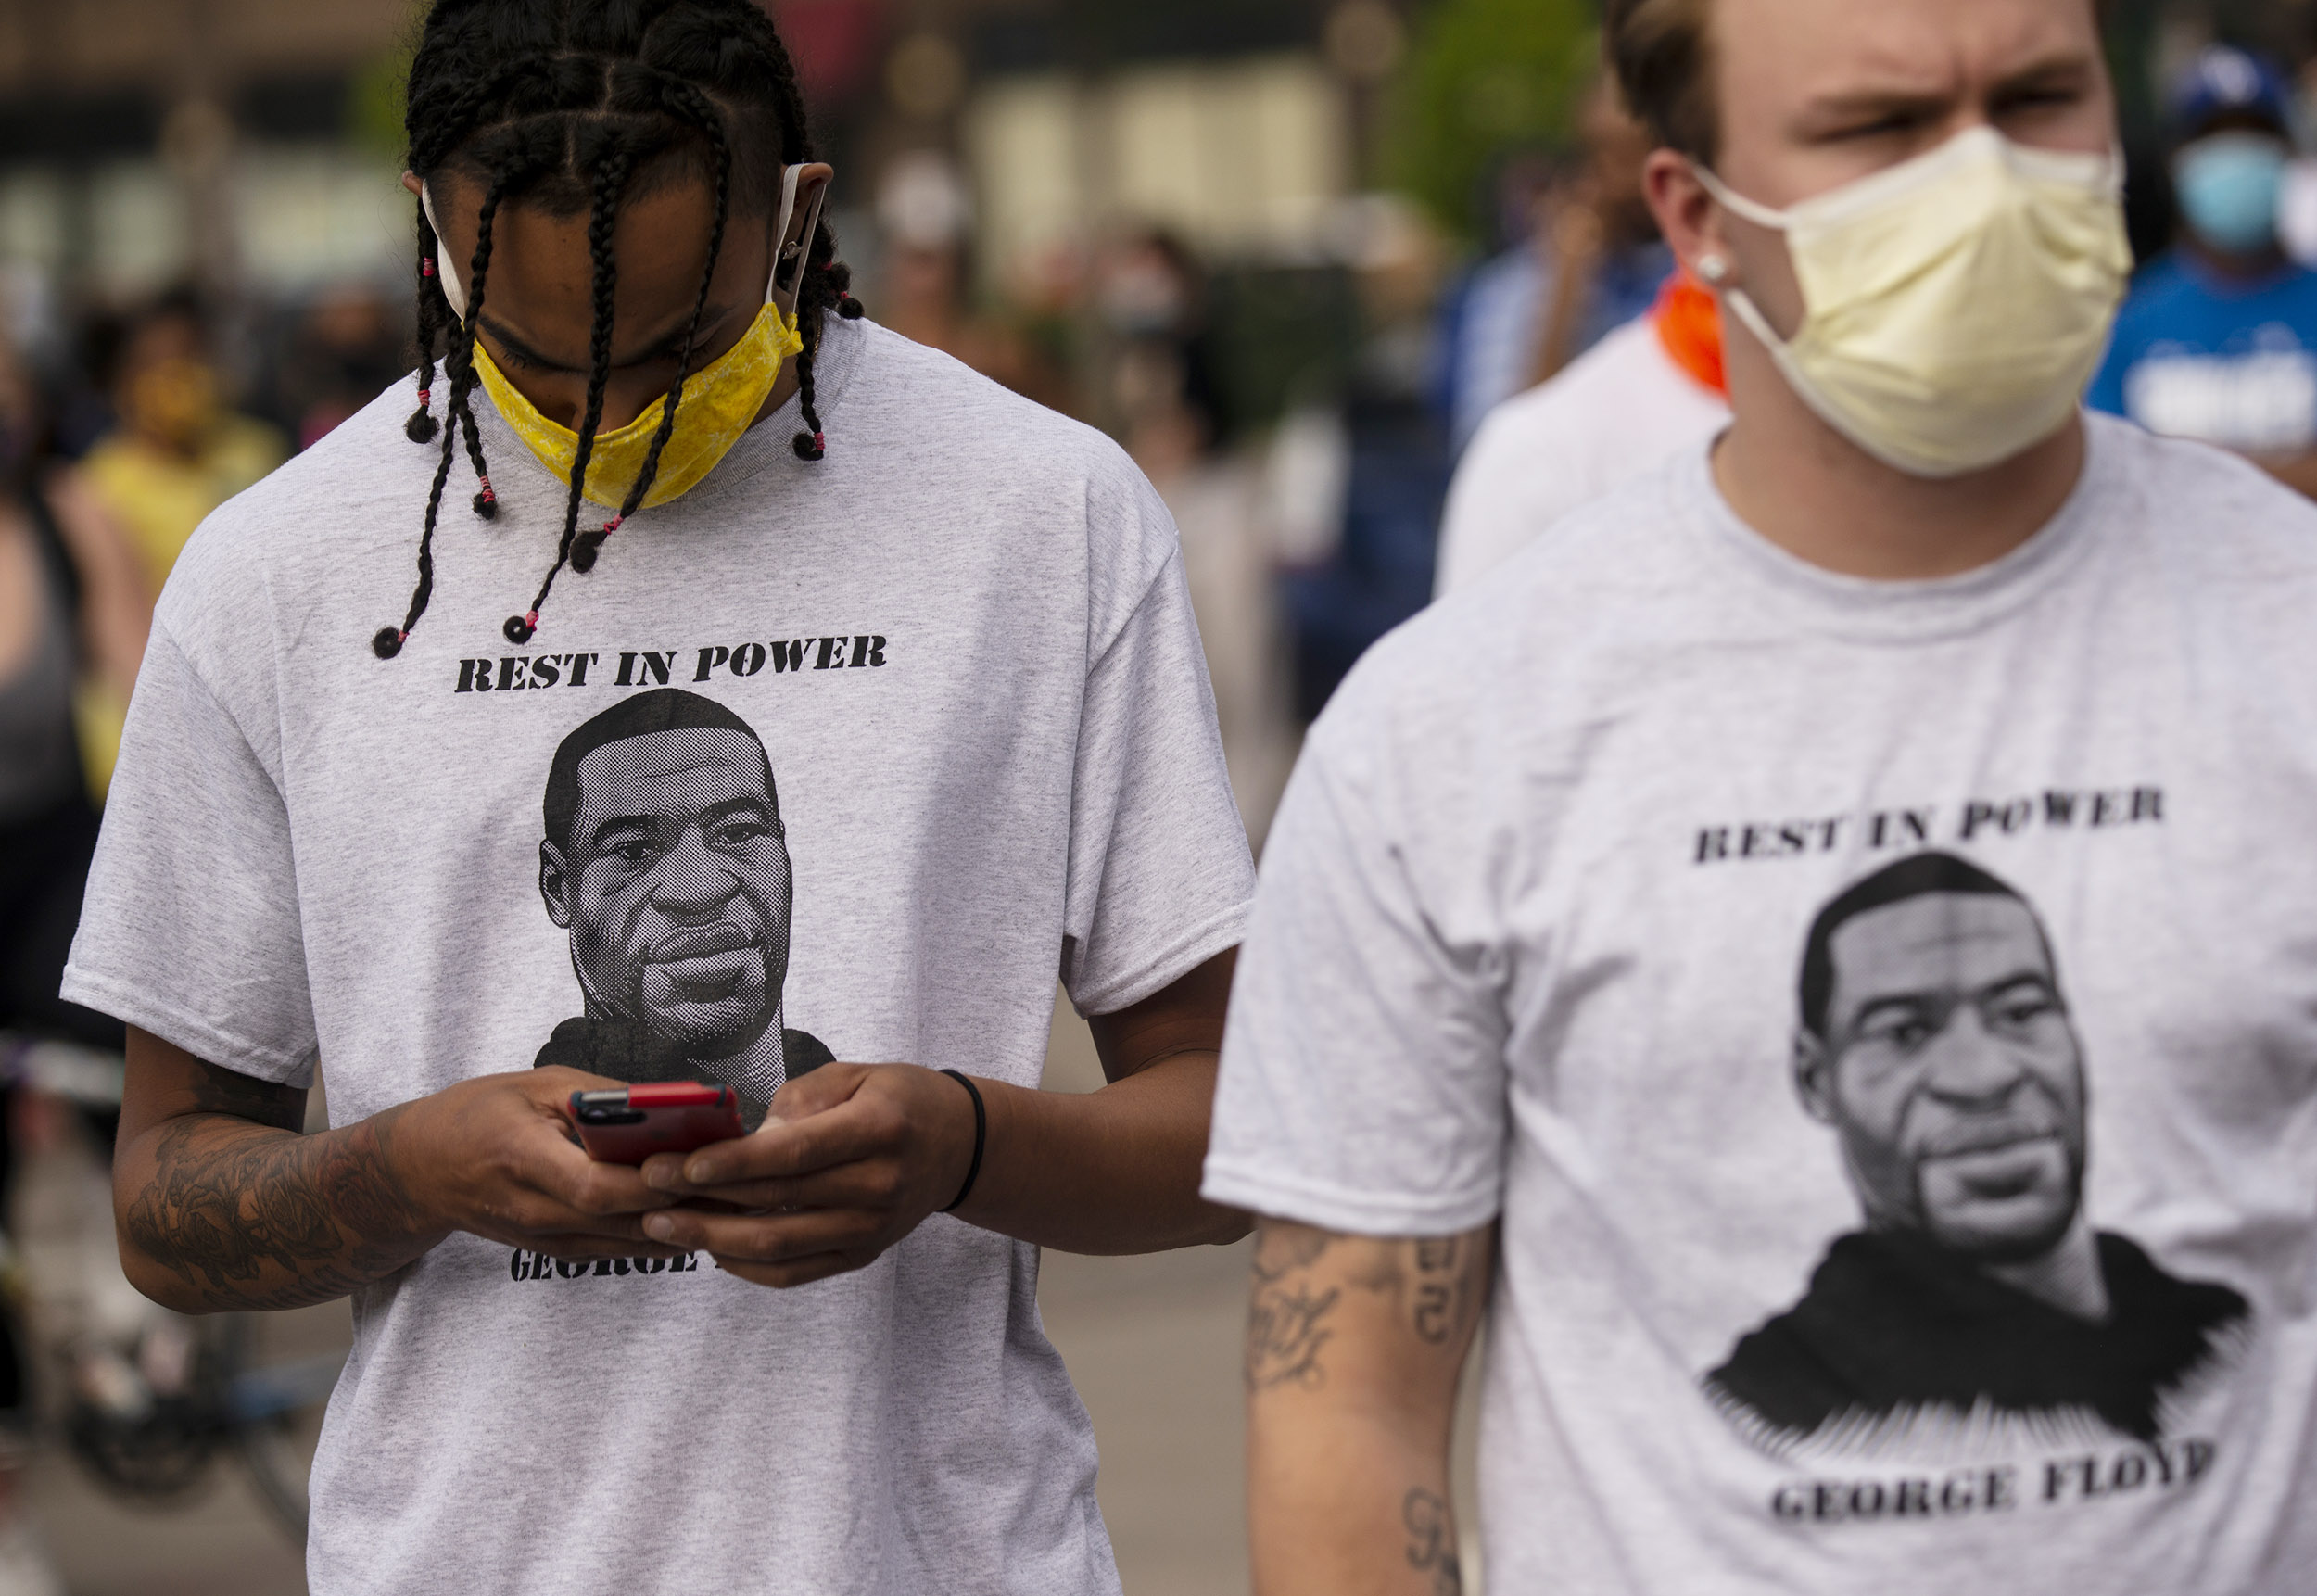 Two men wear shirts stating "Rest in Power George Floyd" outside the Third Police Precinct in Minneapolis, Minnesota, on May 27, 